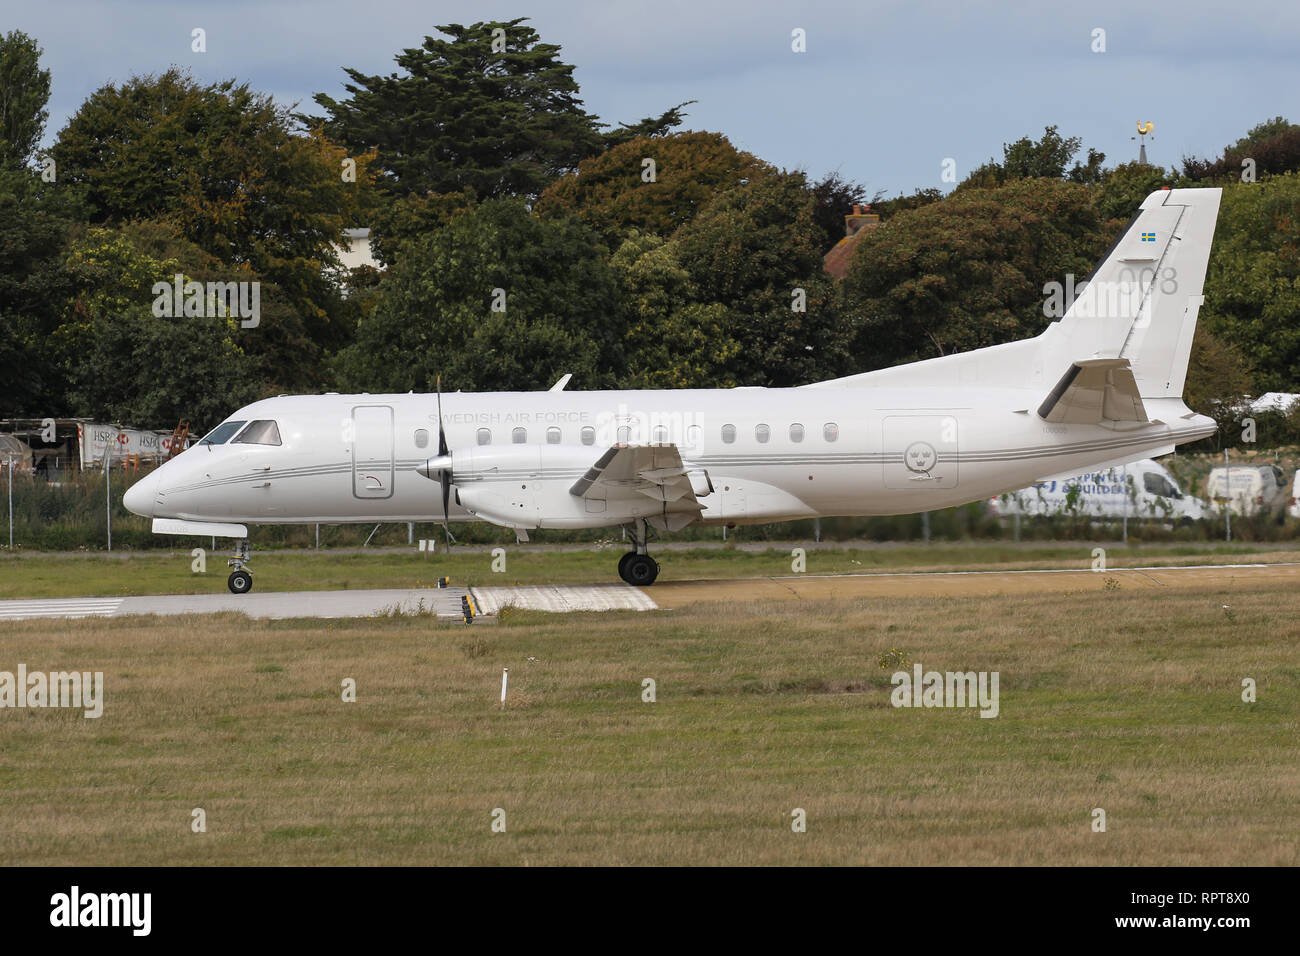 A Saab 340 (008), operated by the Swedish Air Force takes-off from Jersey Airport Stock Photo